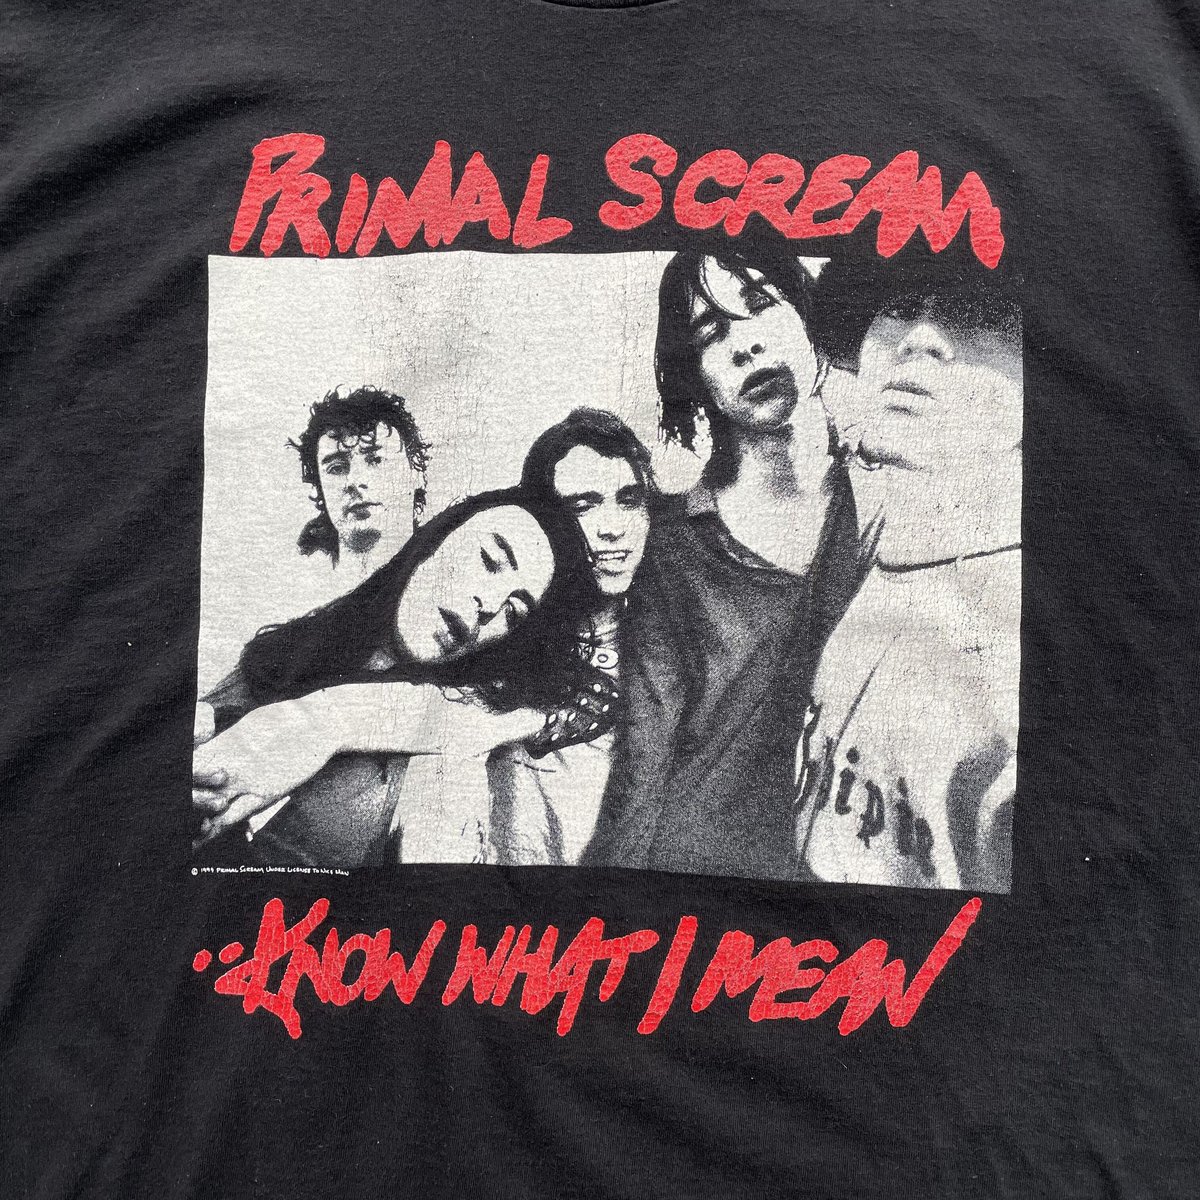 90s Primal scream “ Know what i mean”music tee